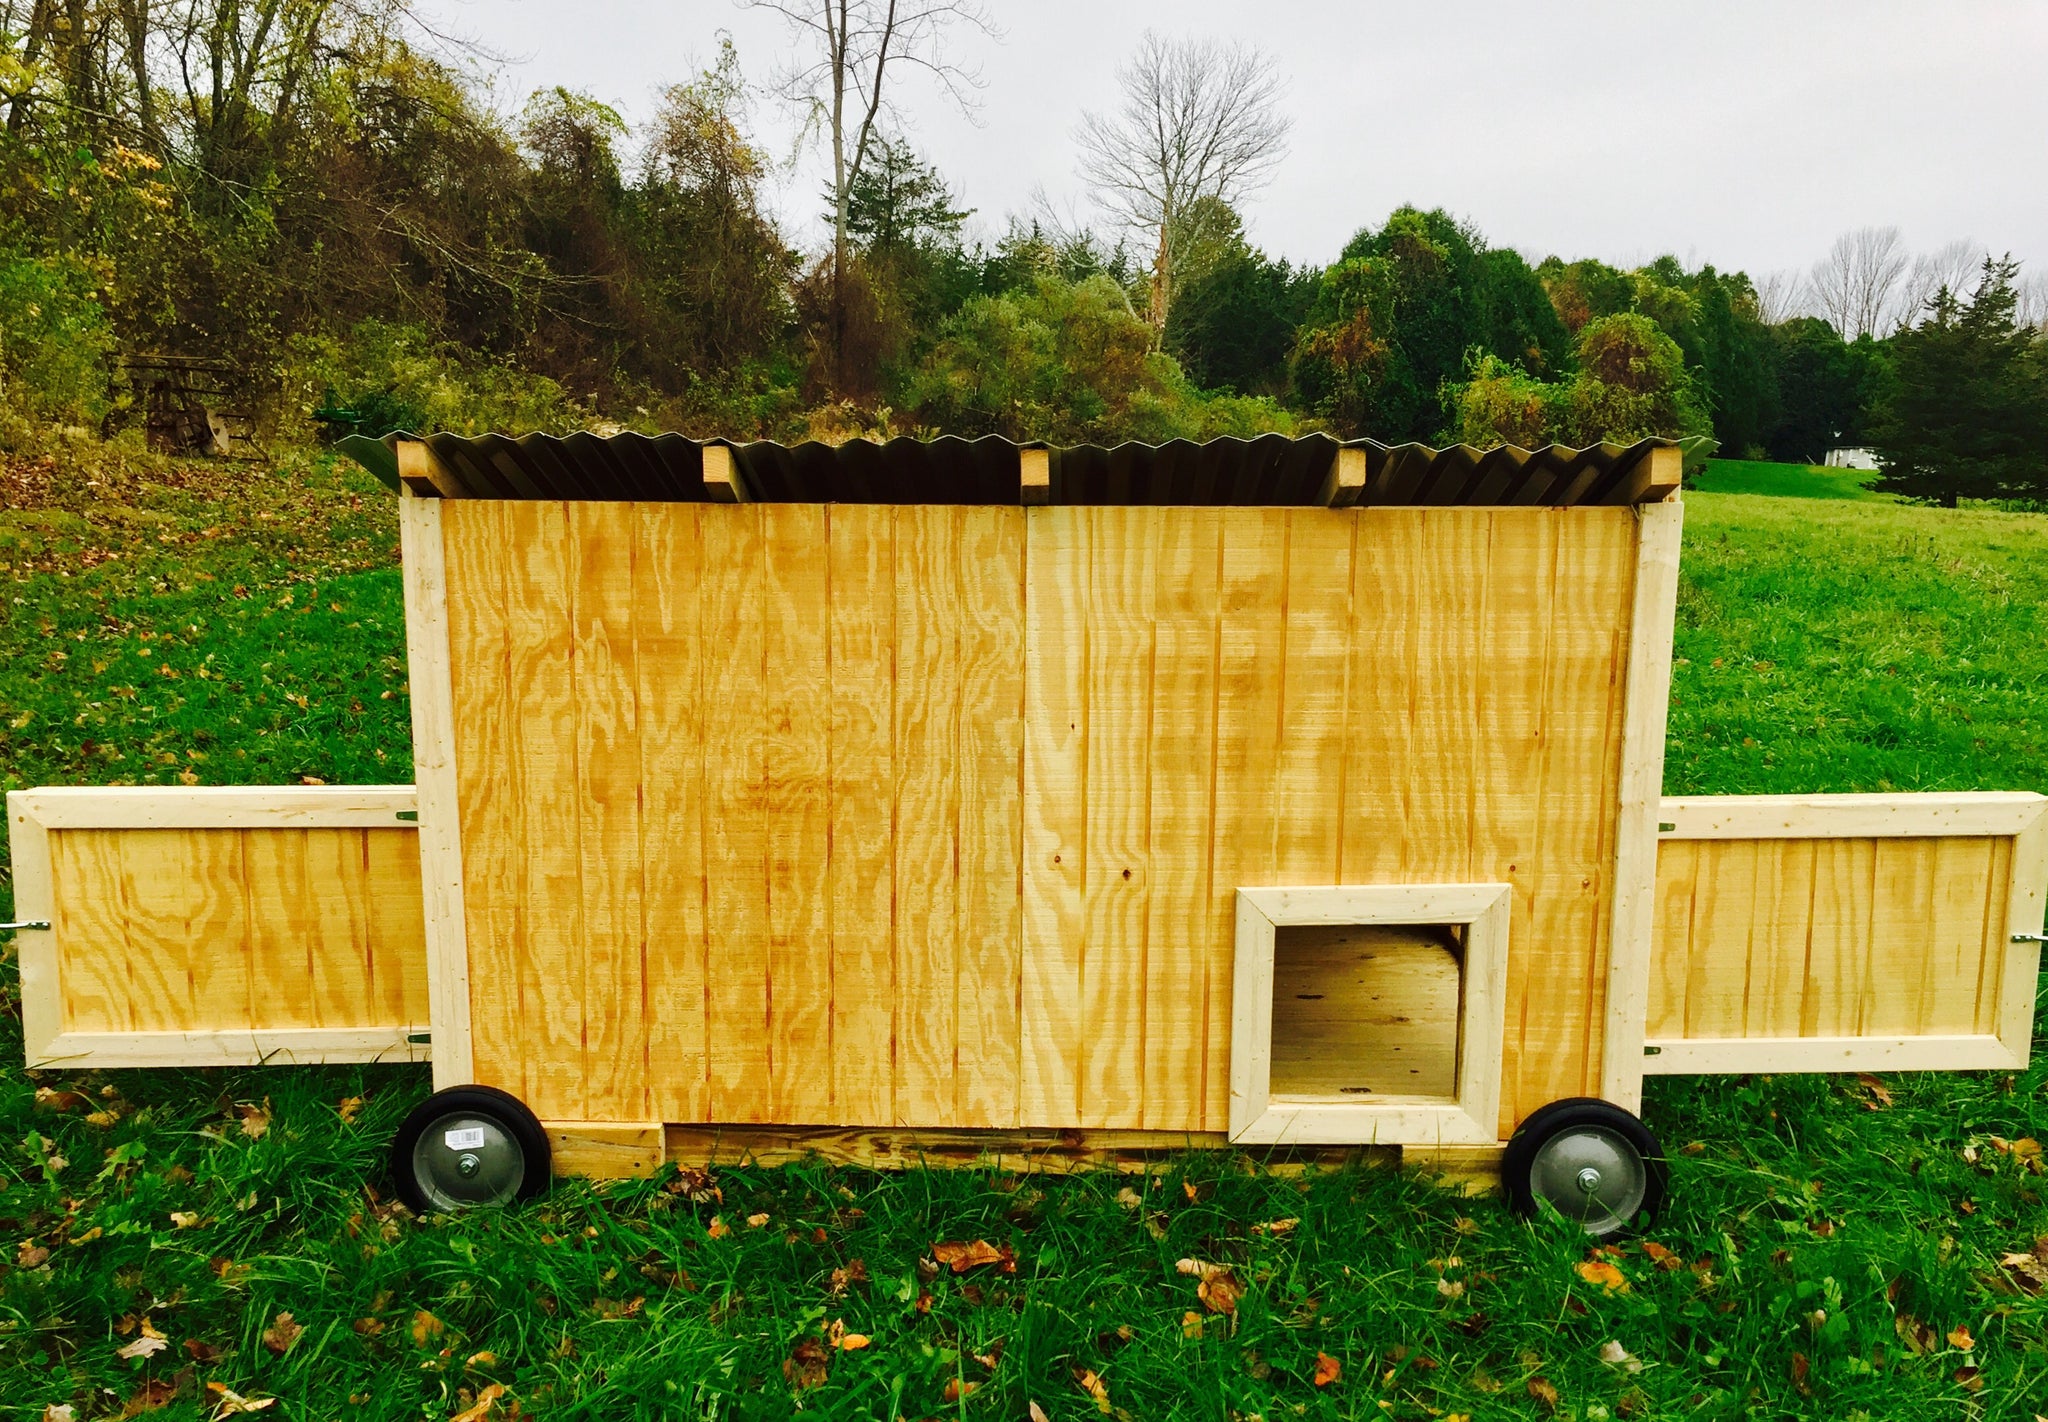 Waterfowl Coop (for Ducks and Geese)